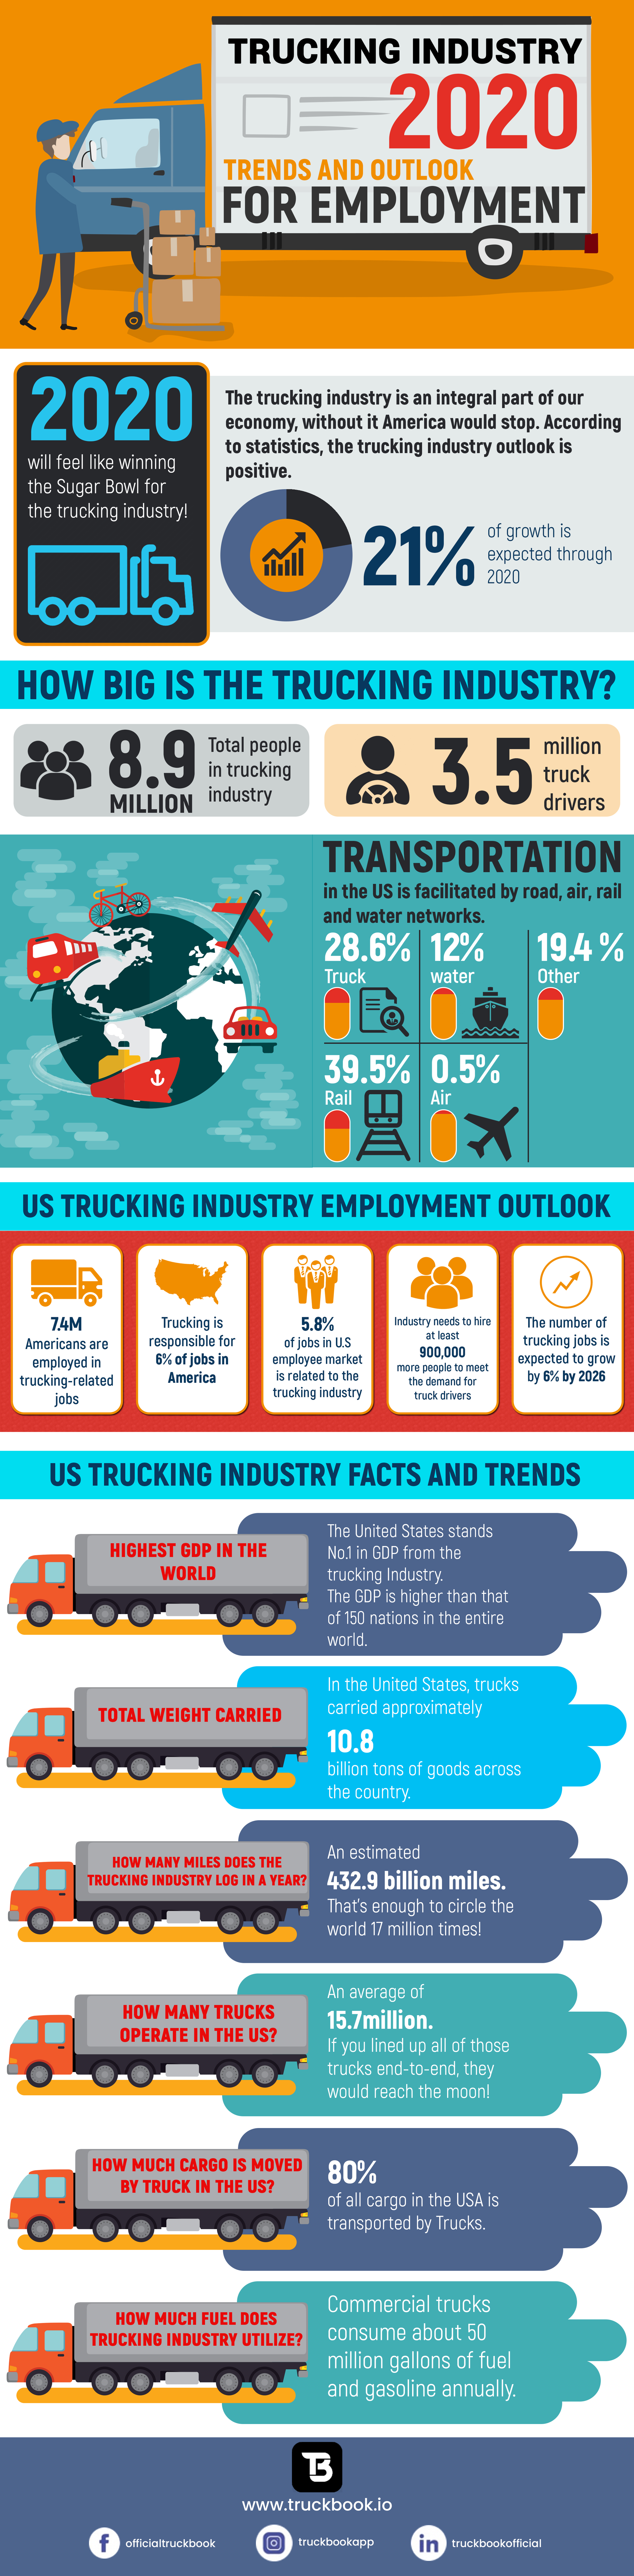 Trucking Industry 2020: Trends And Outlook For Employment